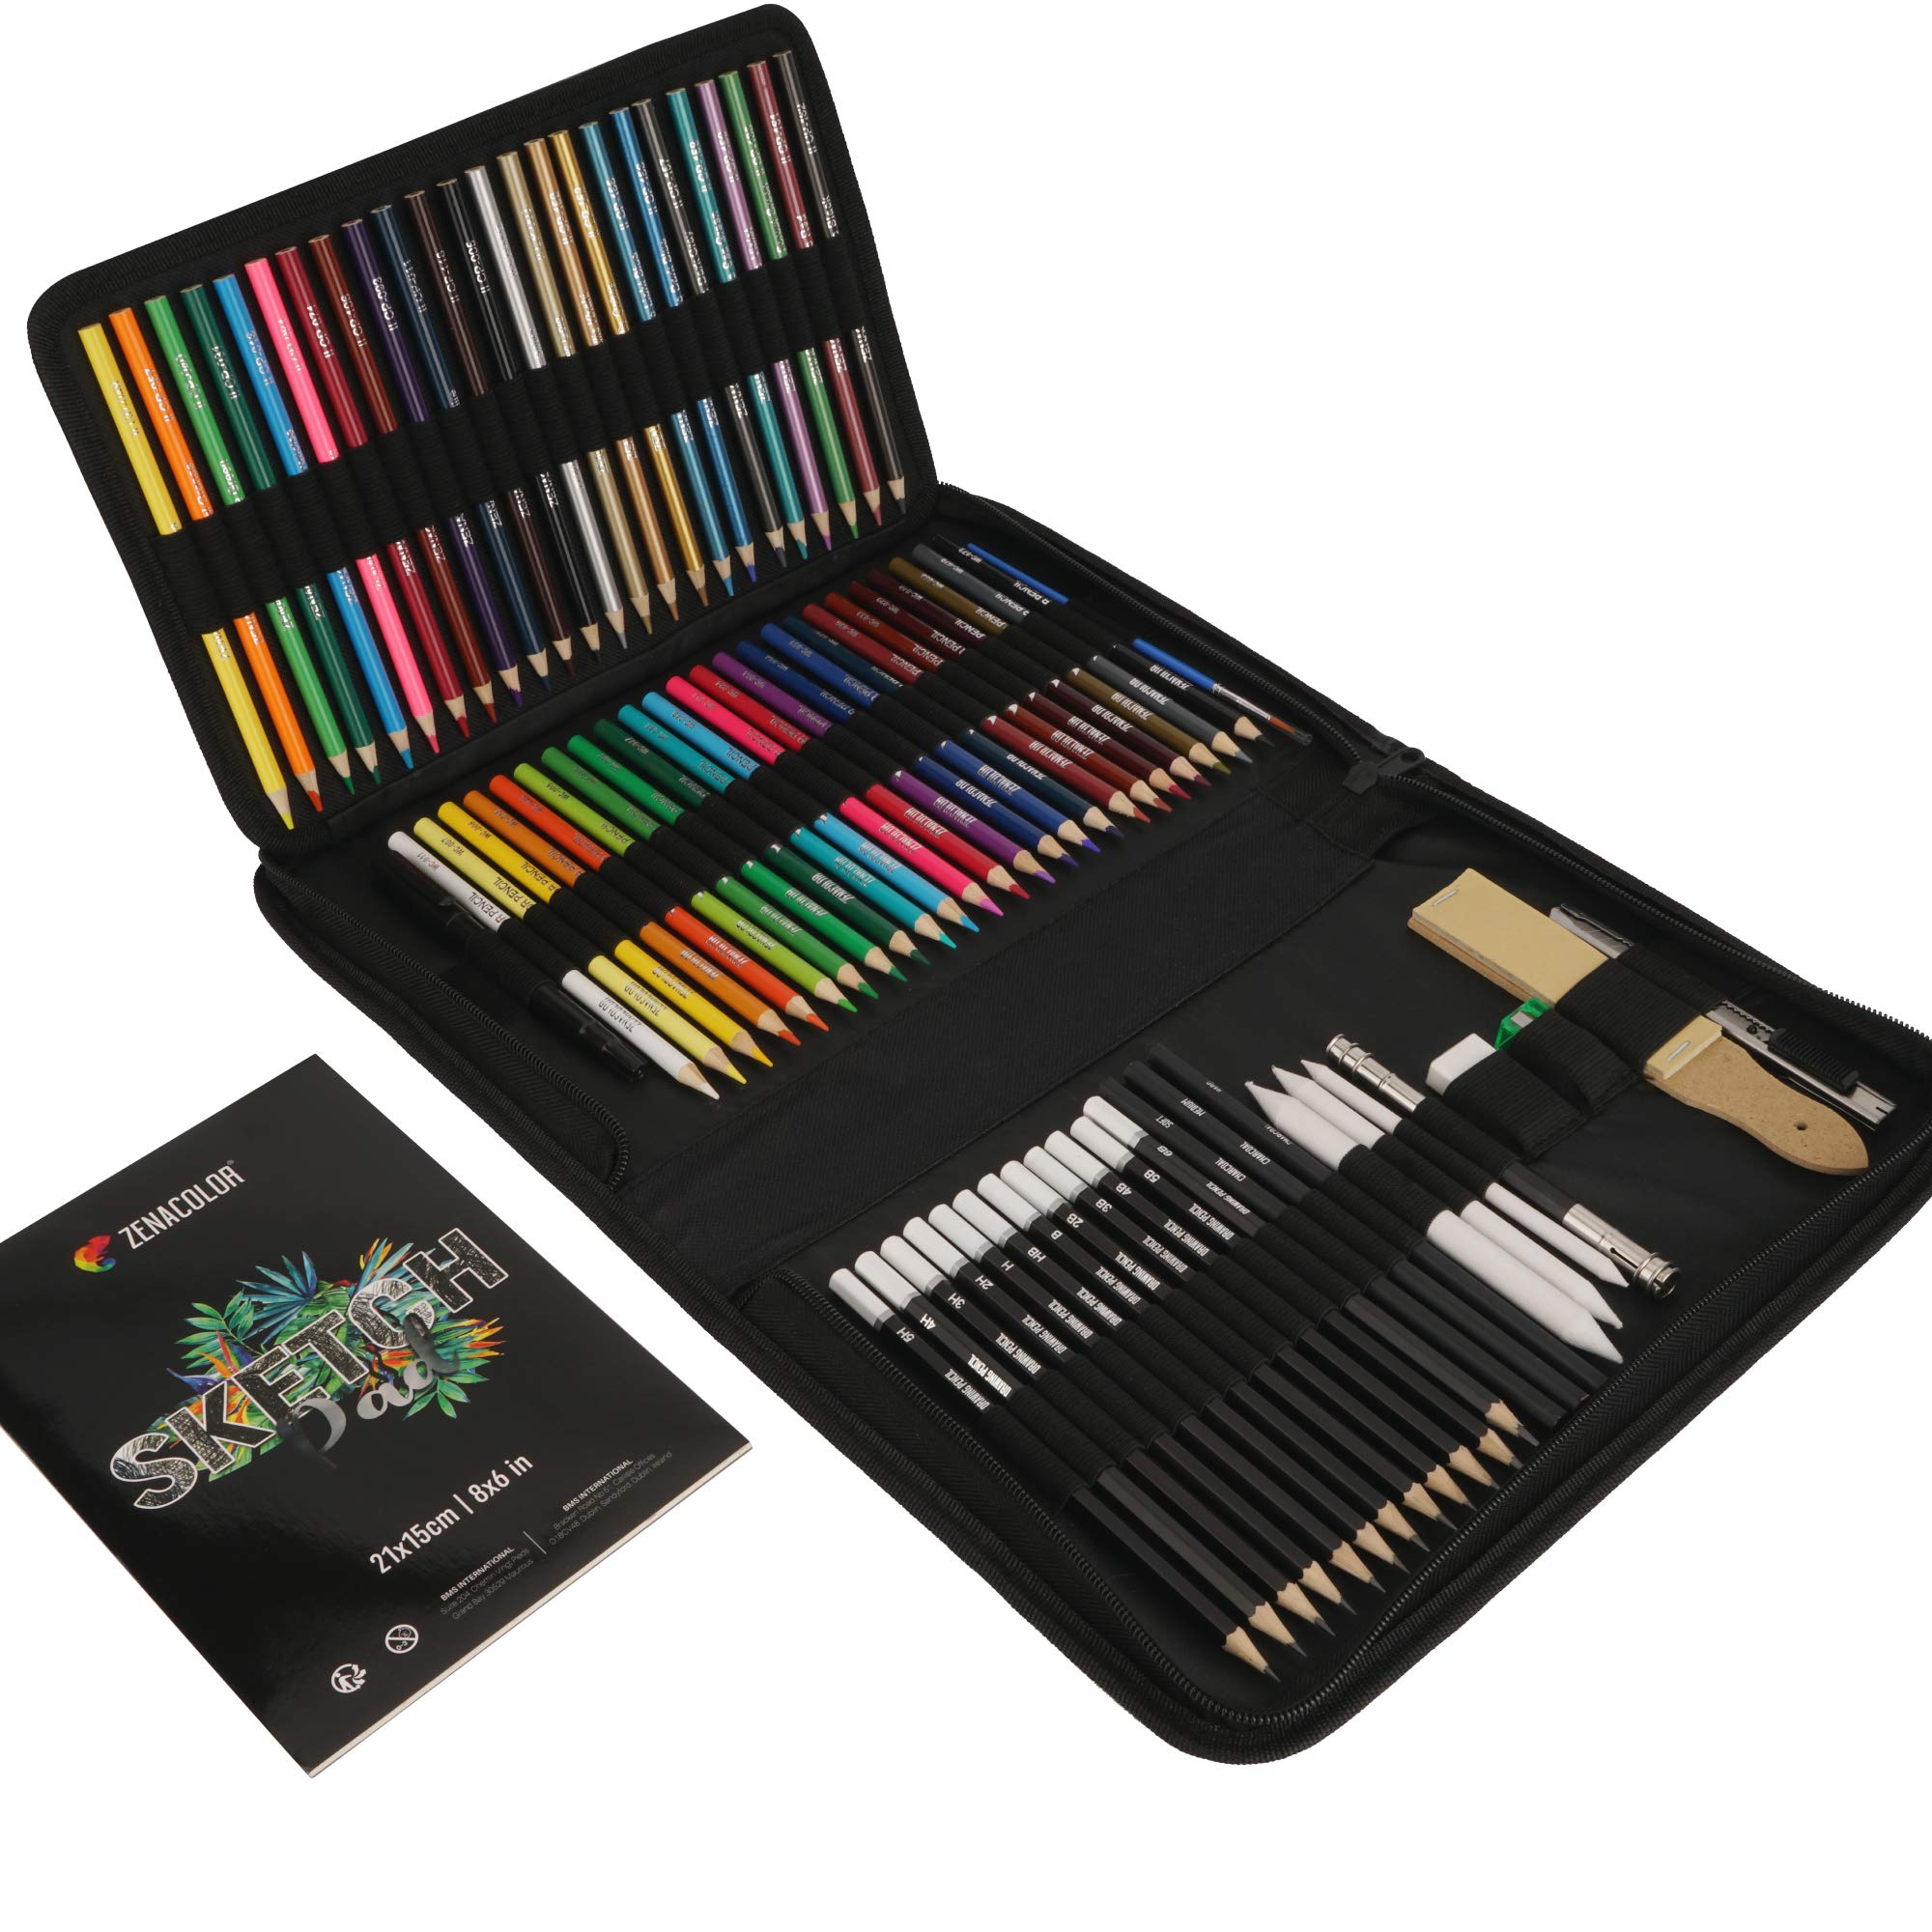  Zenacolor 74 Pack Drawing Set, Pro Art kit include Sketchbook,  Colored, Graphite, Watercolor, Metallic & Charcoal Pencils for Drawing +  Accessories, Art Sketch Supplies for Artists, Adults, kids : Arts